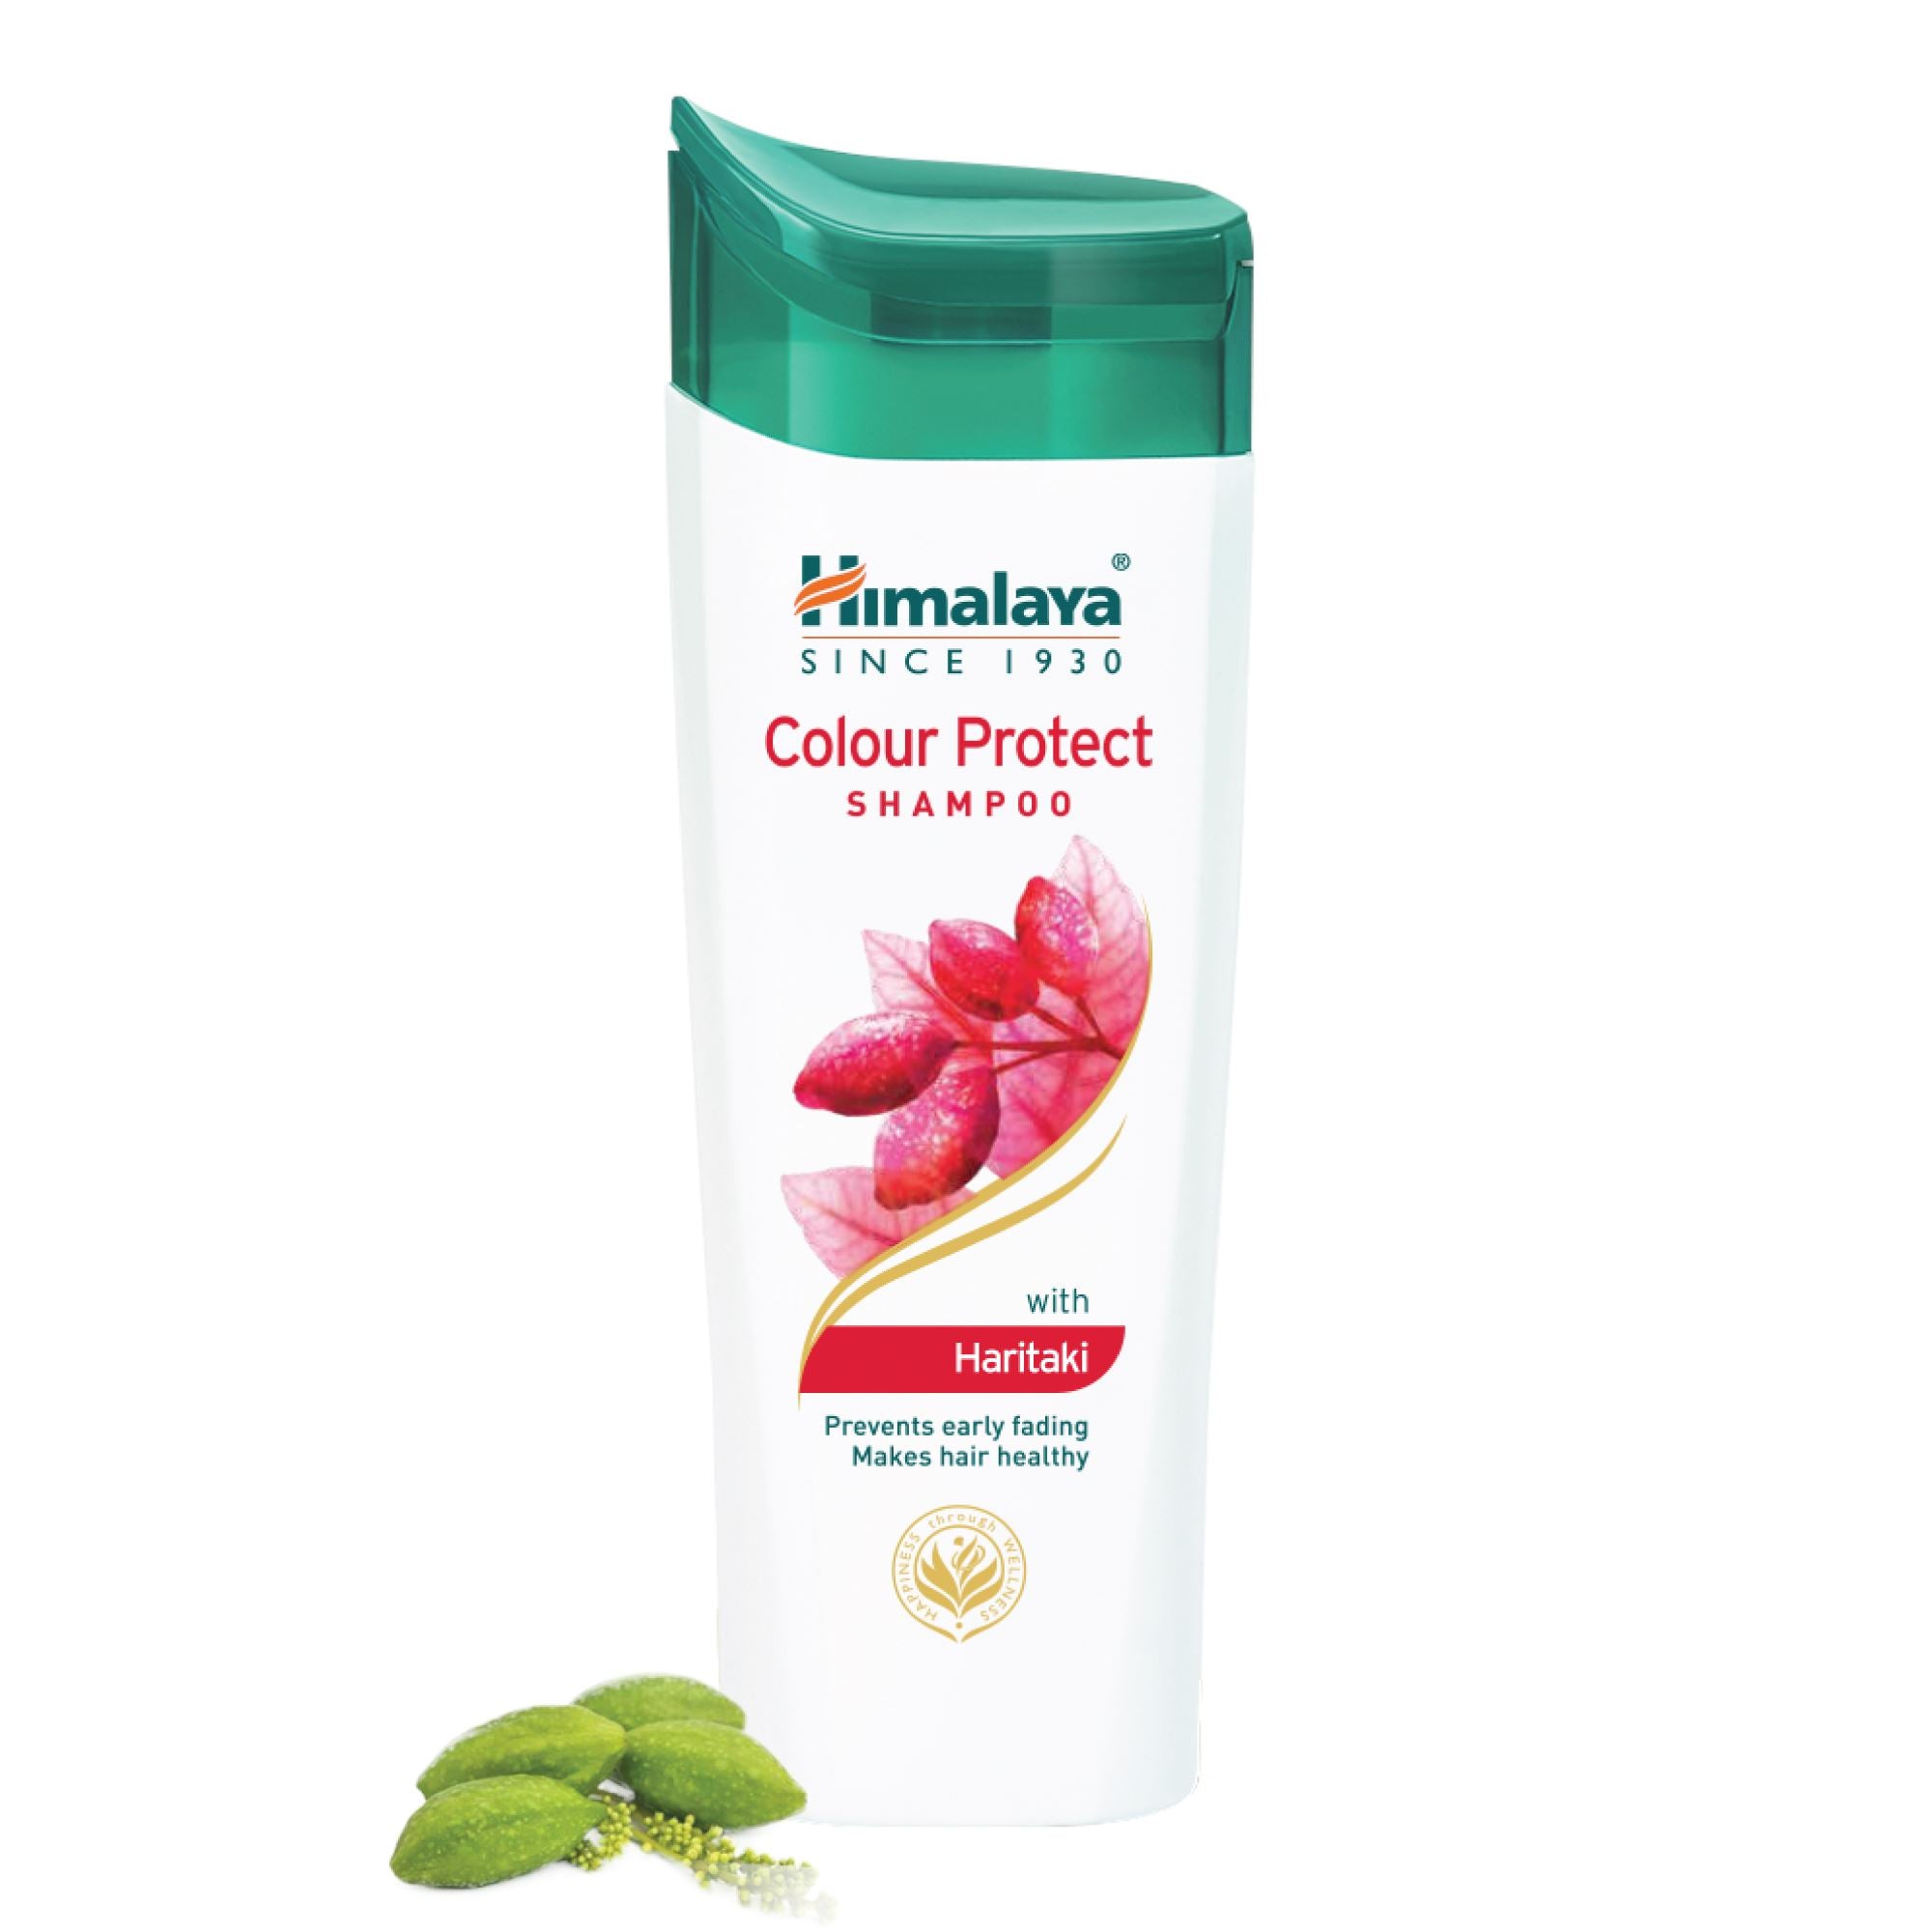 Himalaya Color Protect Shampoo - Prevents Early Fading